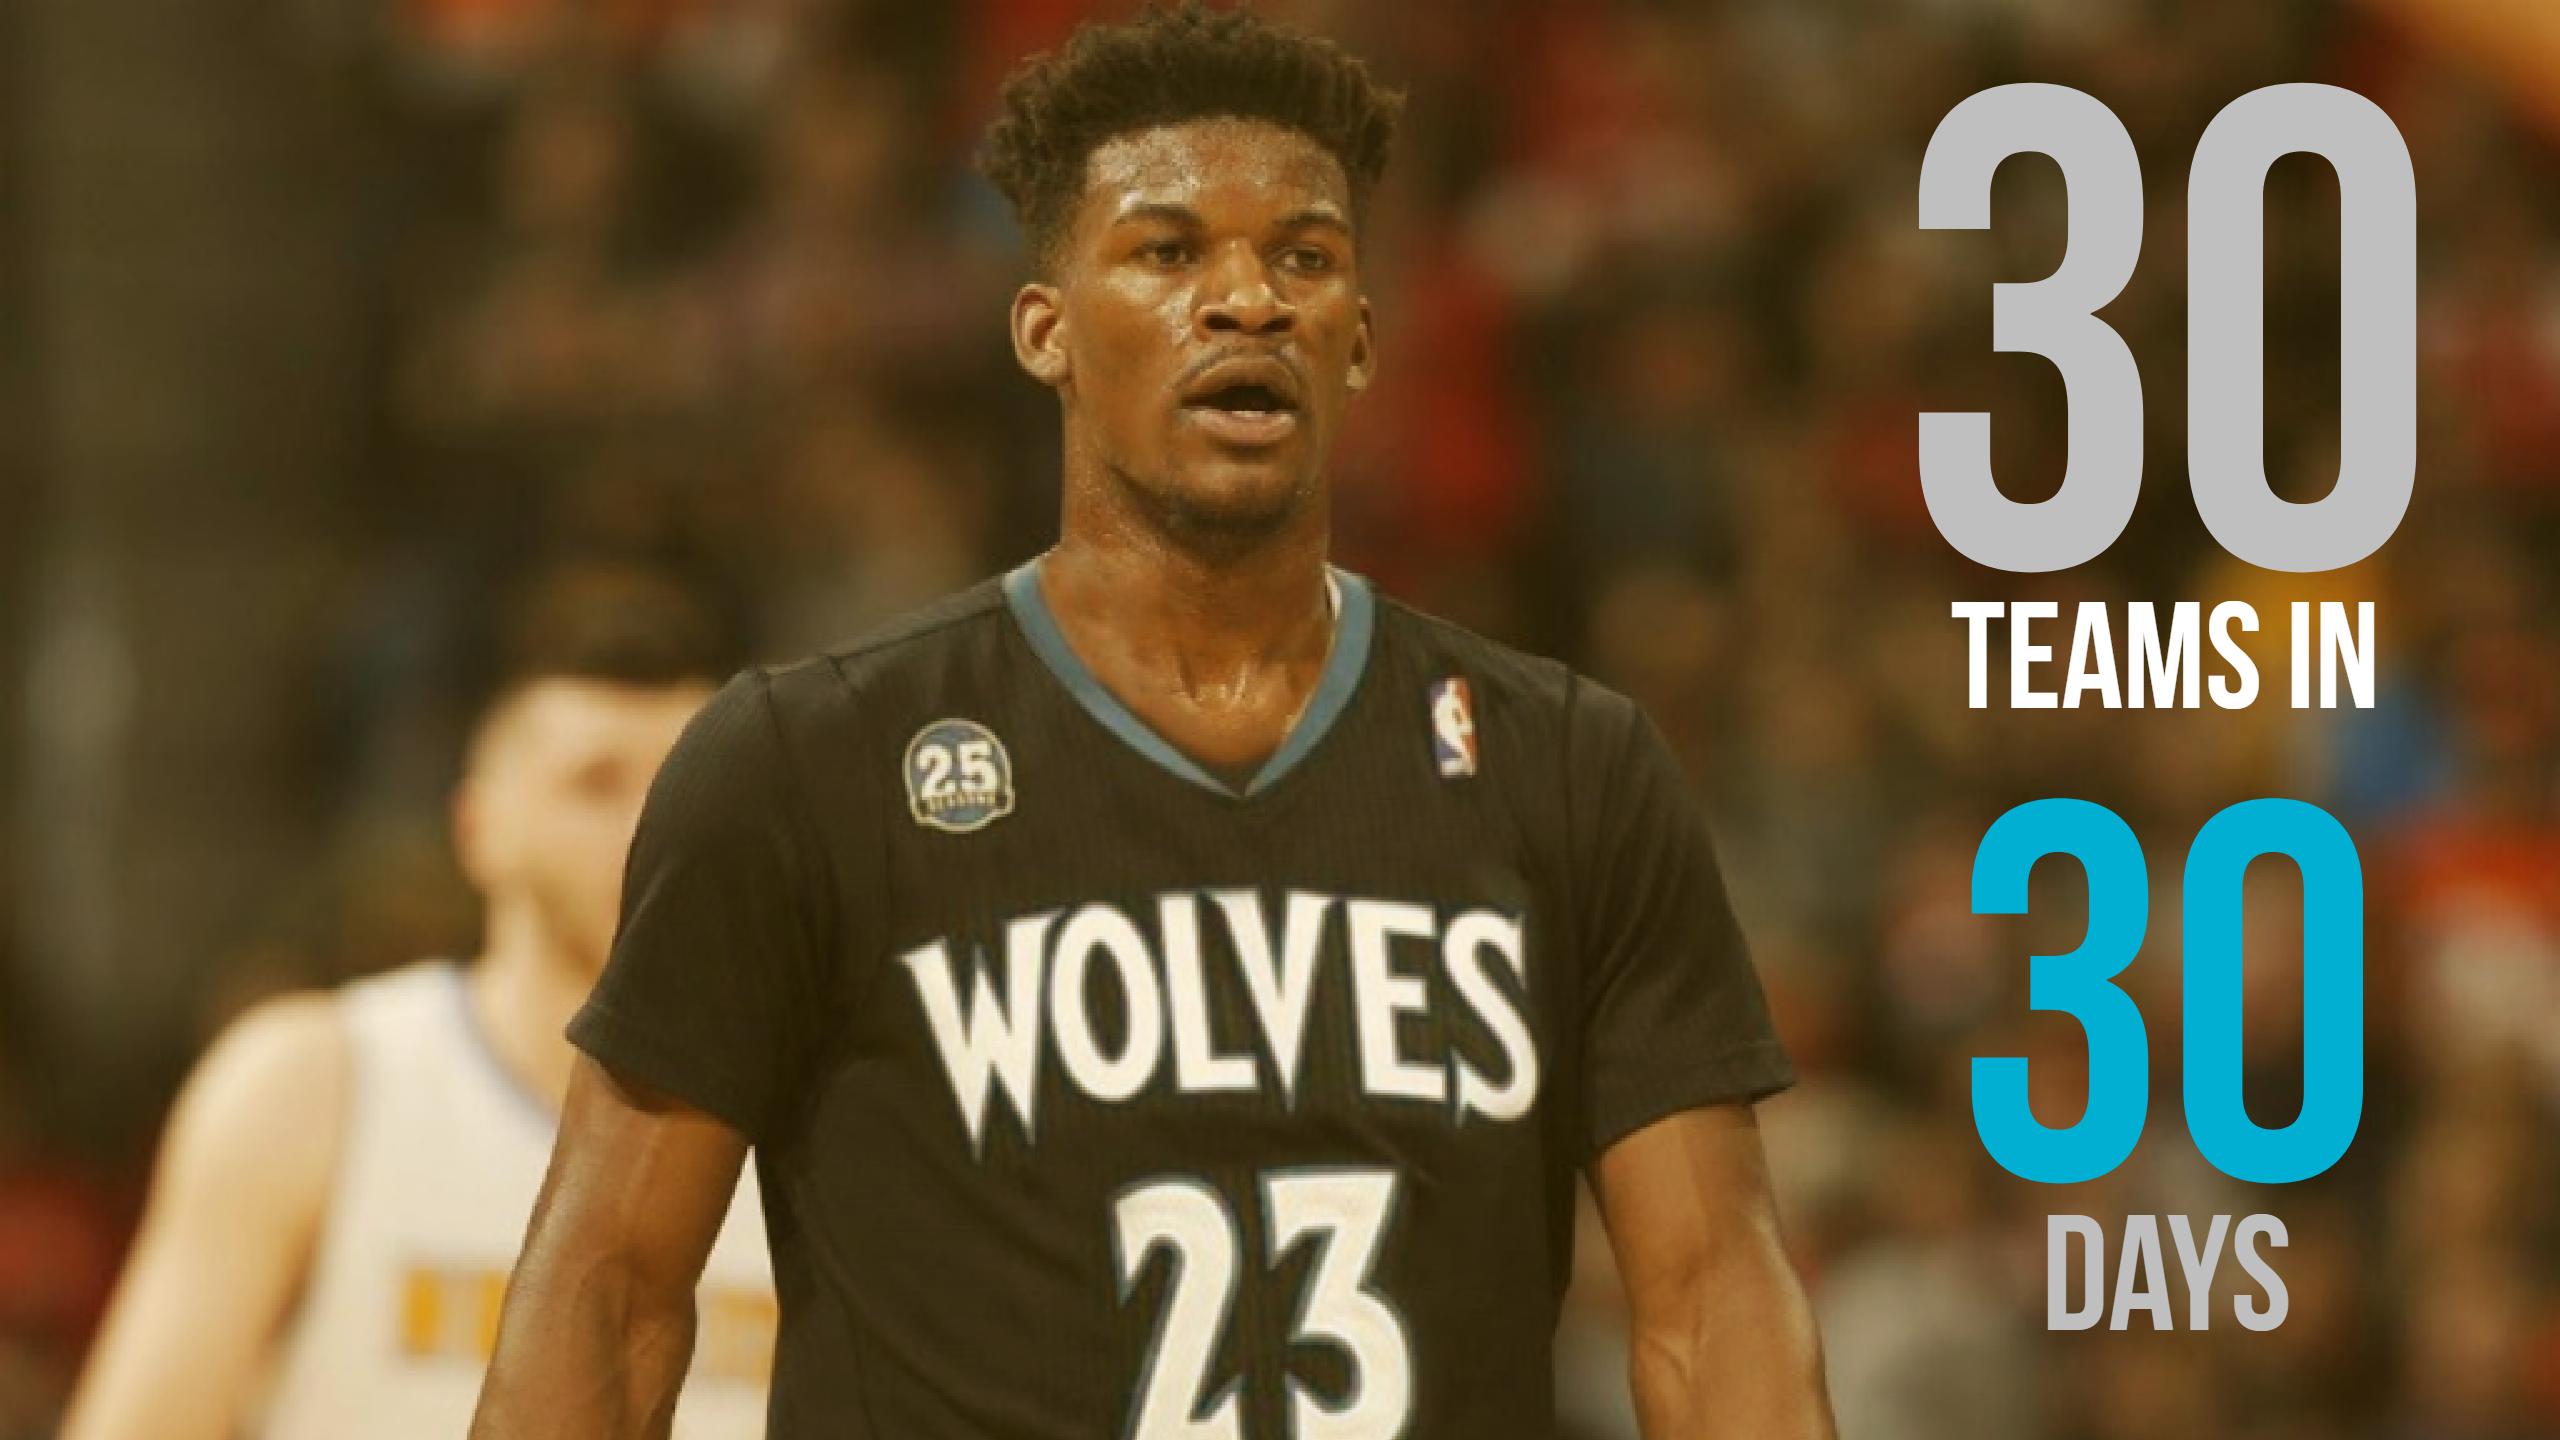 teams in 30 days: New faces have Minnesota Timberwolves poised